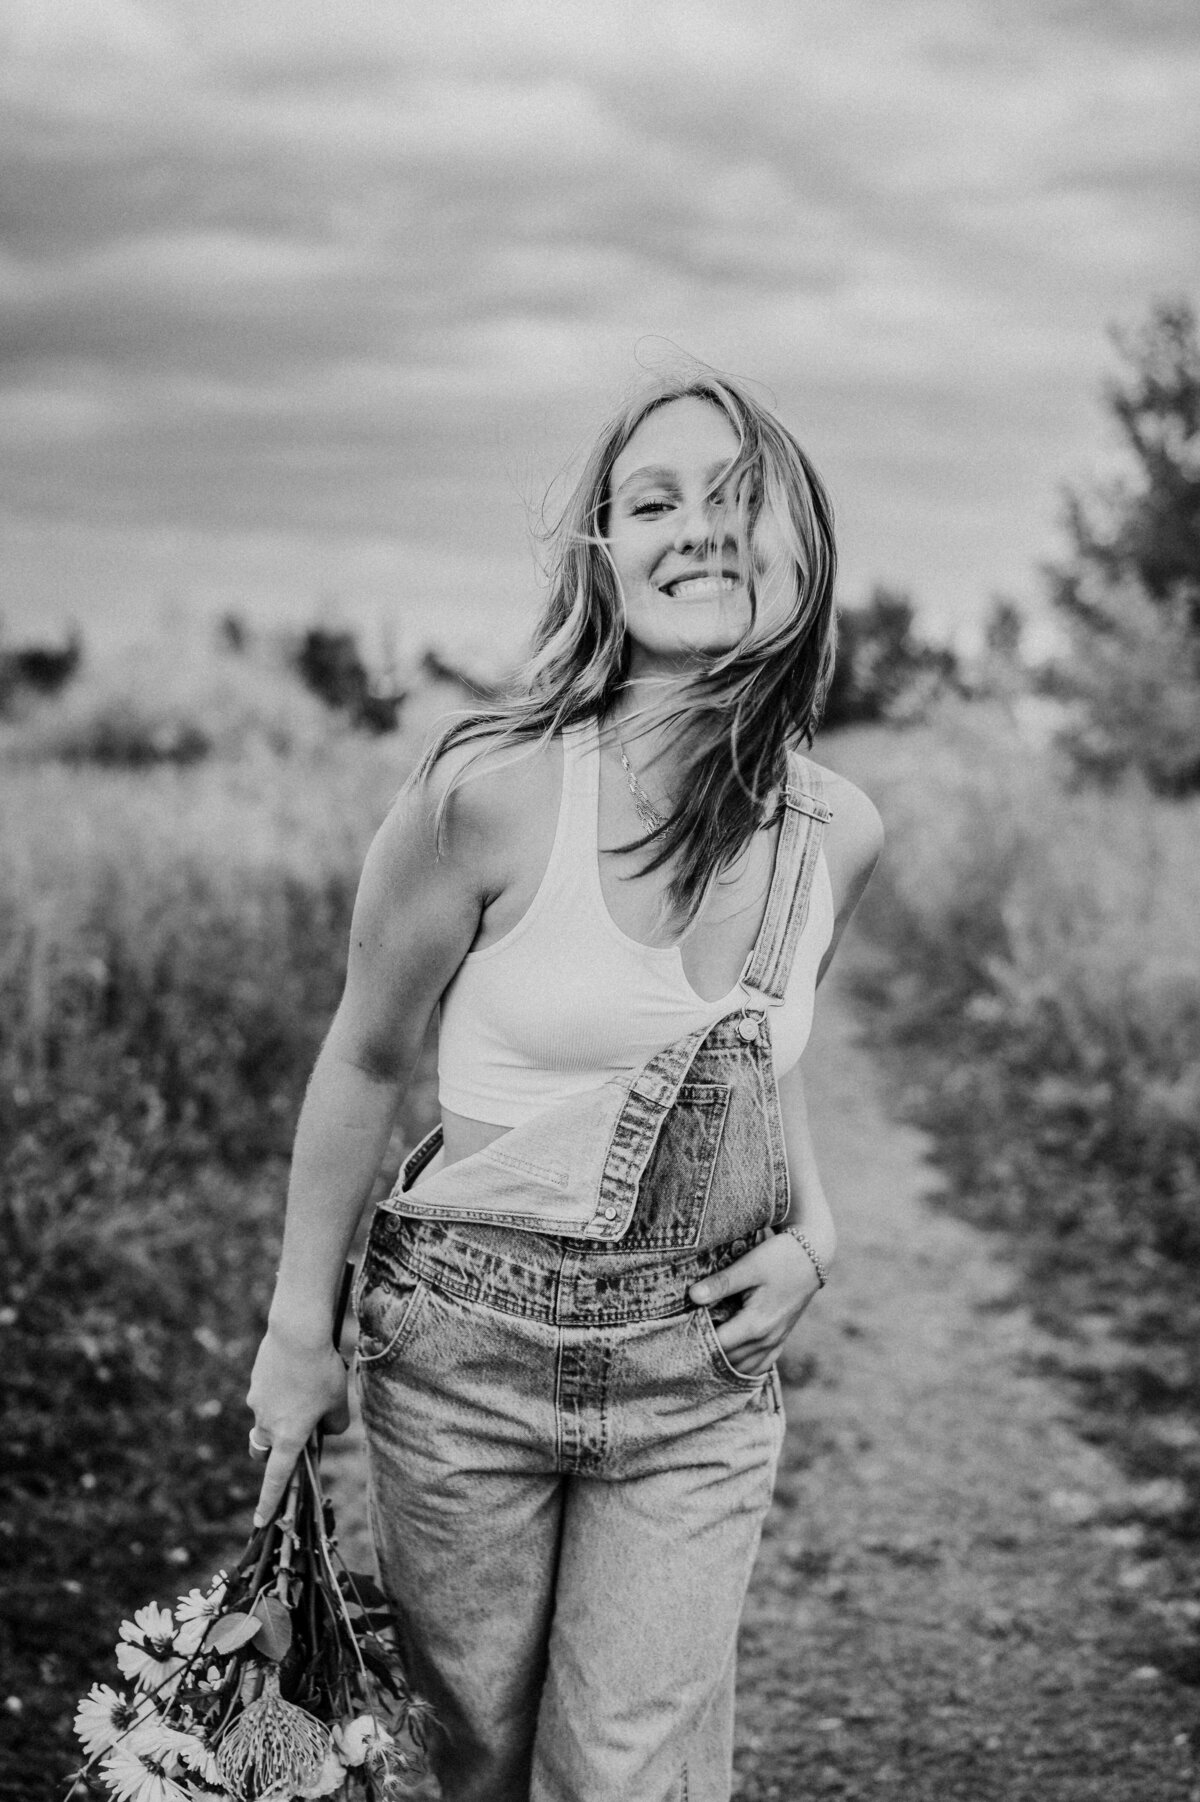 Black and white fun and energetic senior portrait of her walking on a dirt trail outside